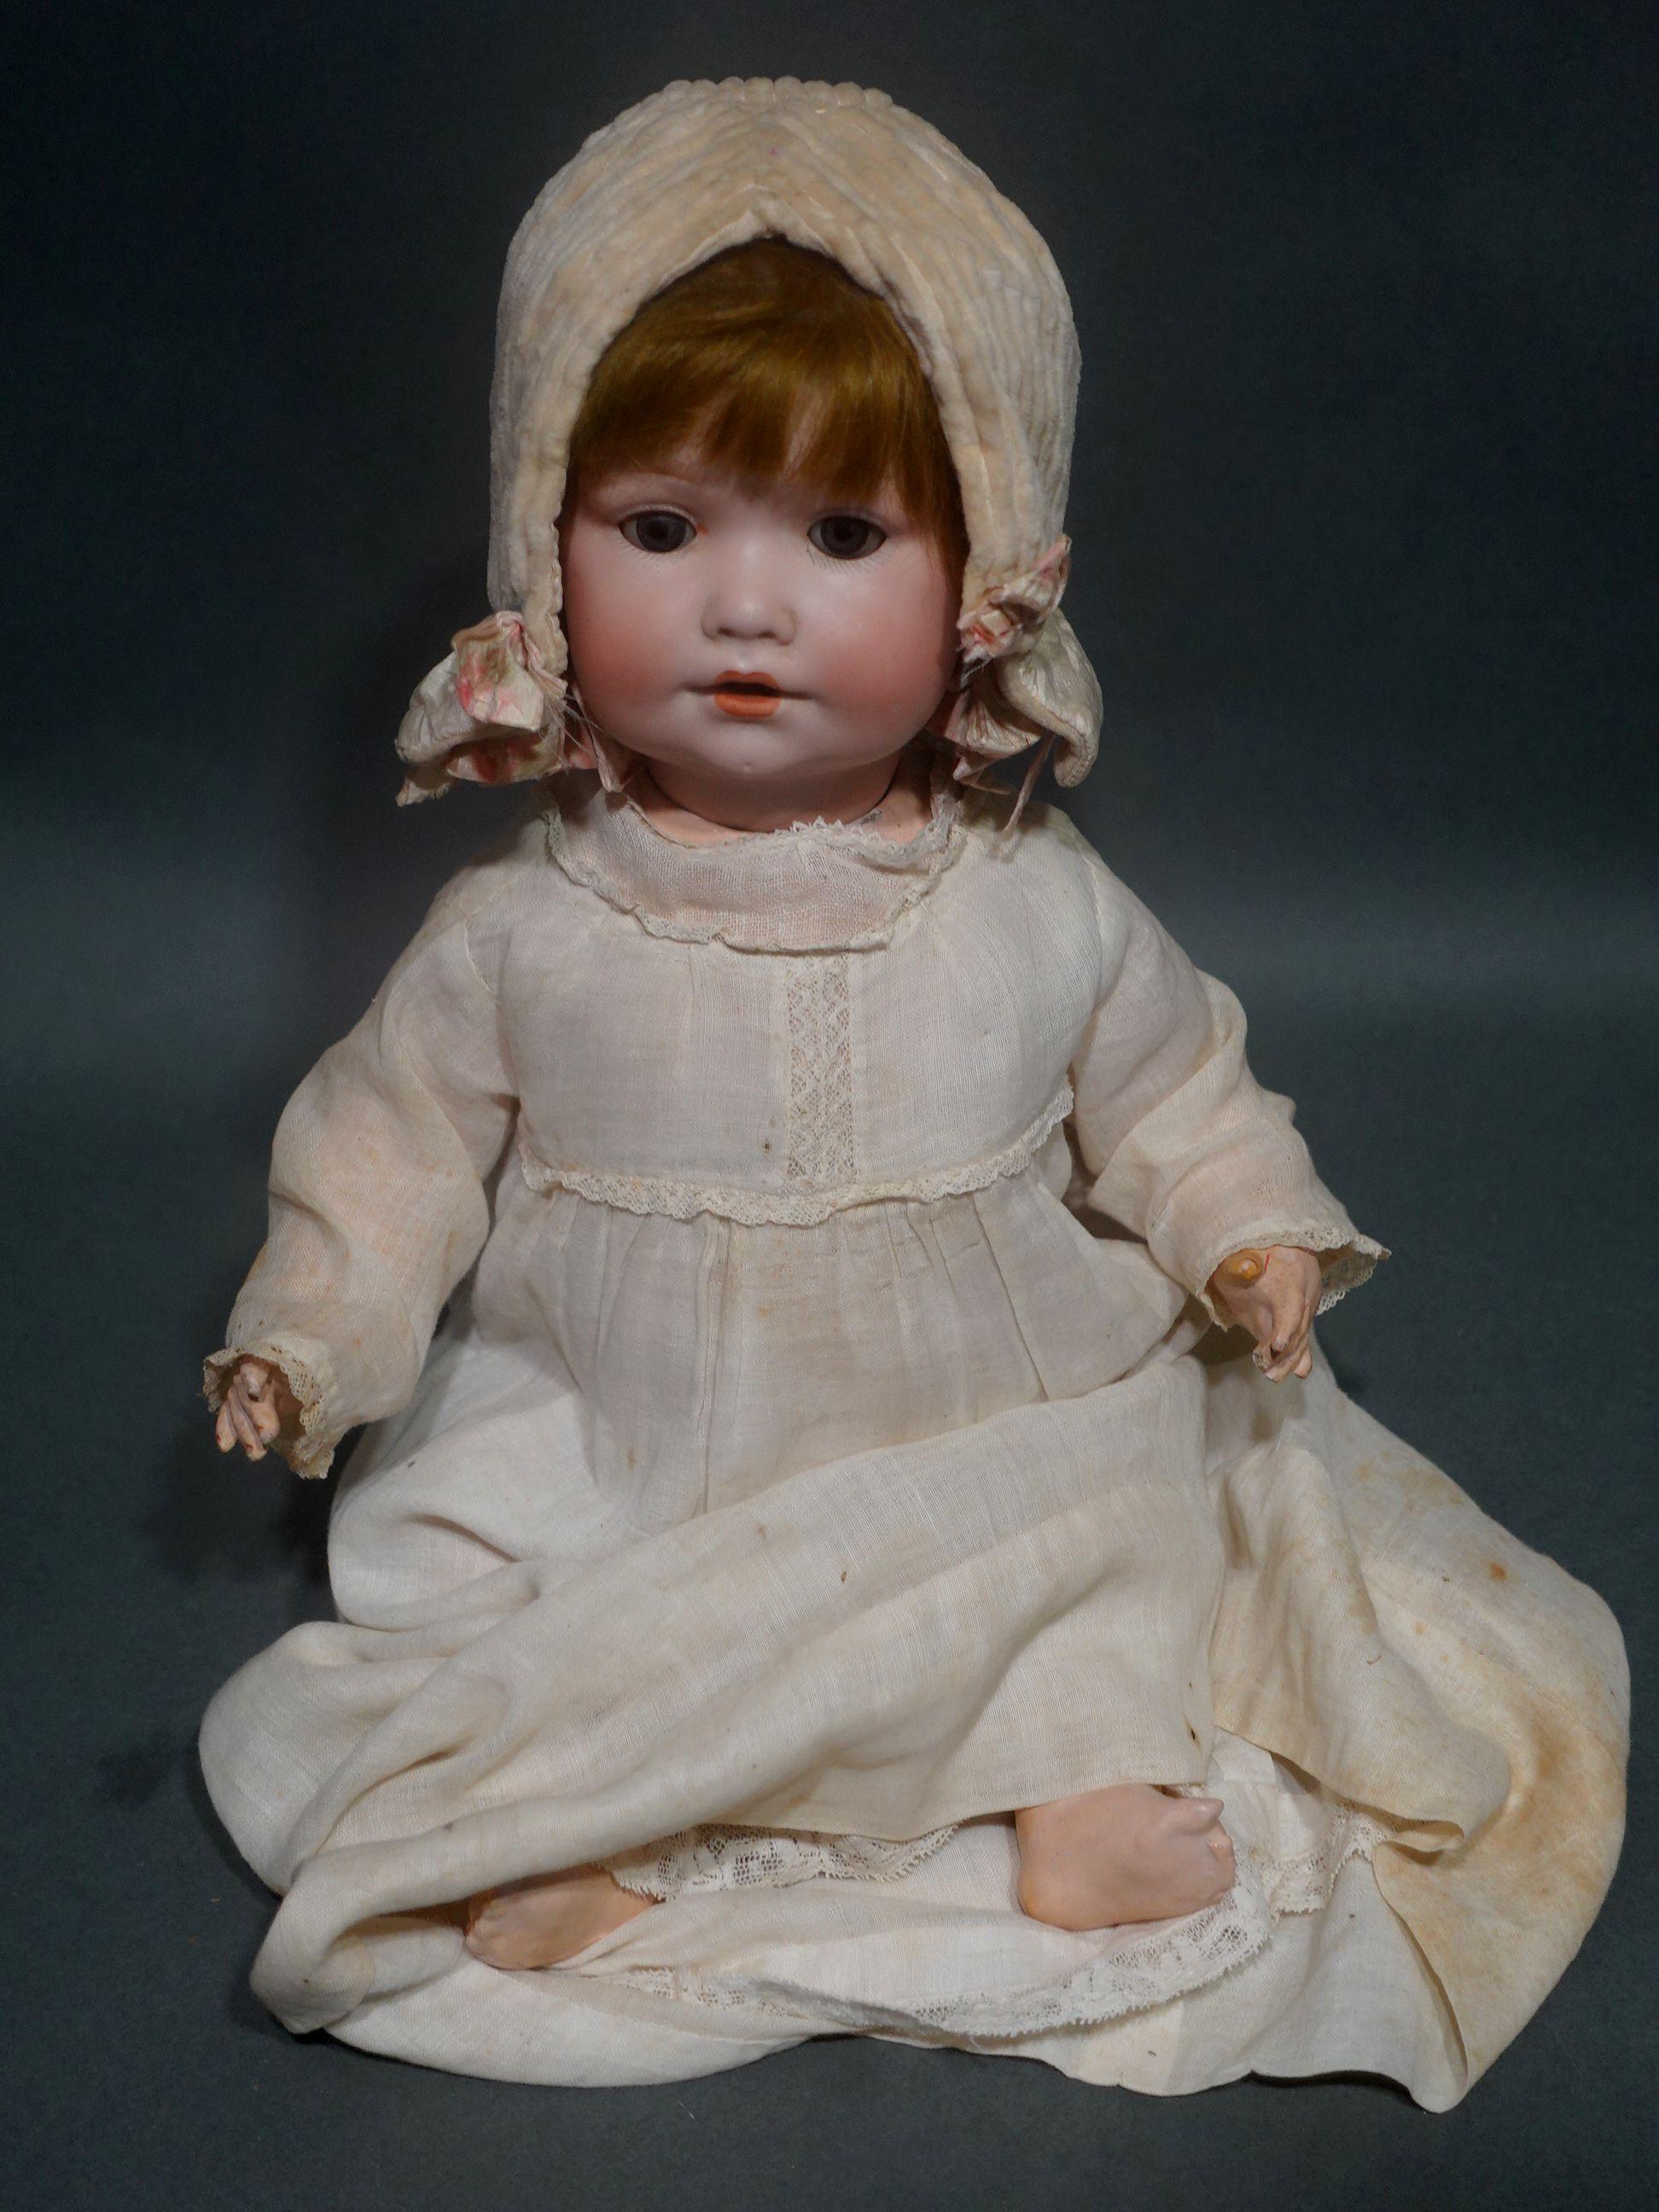 Brushed Antique German Bisque Doll 971 A 2 M Armand Marseille, Ric#004 For Sale